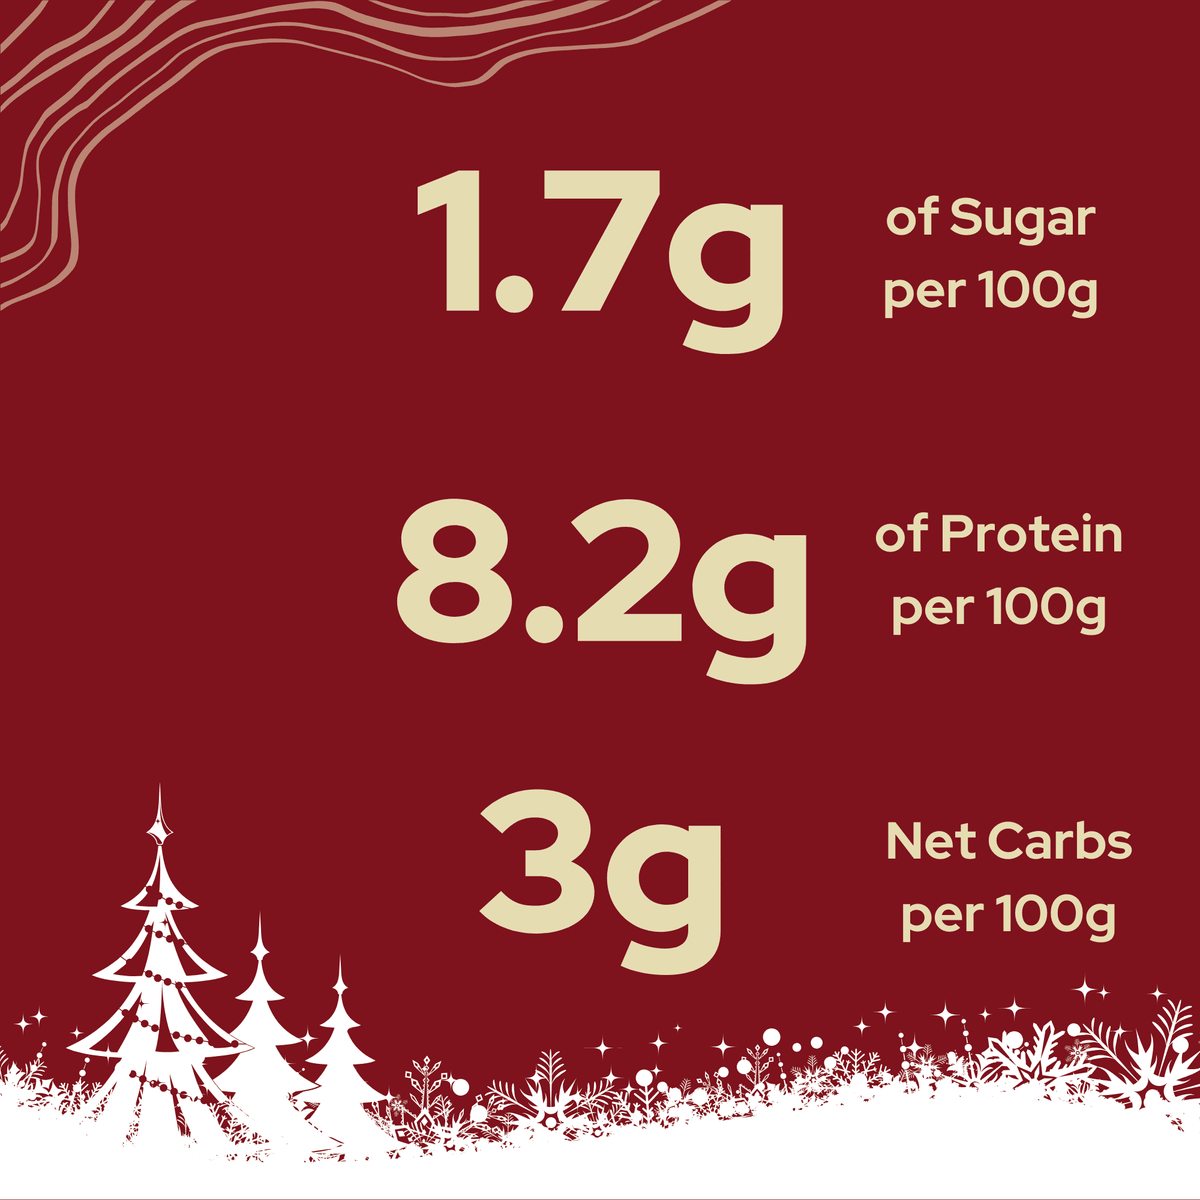 The nutritional information of a Sticky Toffee Keto Cake Bite | Limited Edition by No Guilt Bakes alternative.